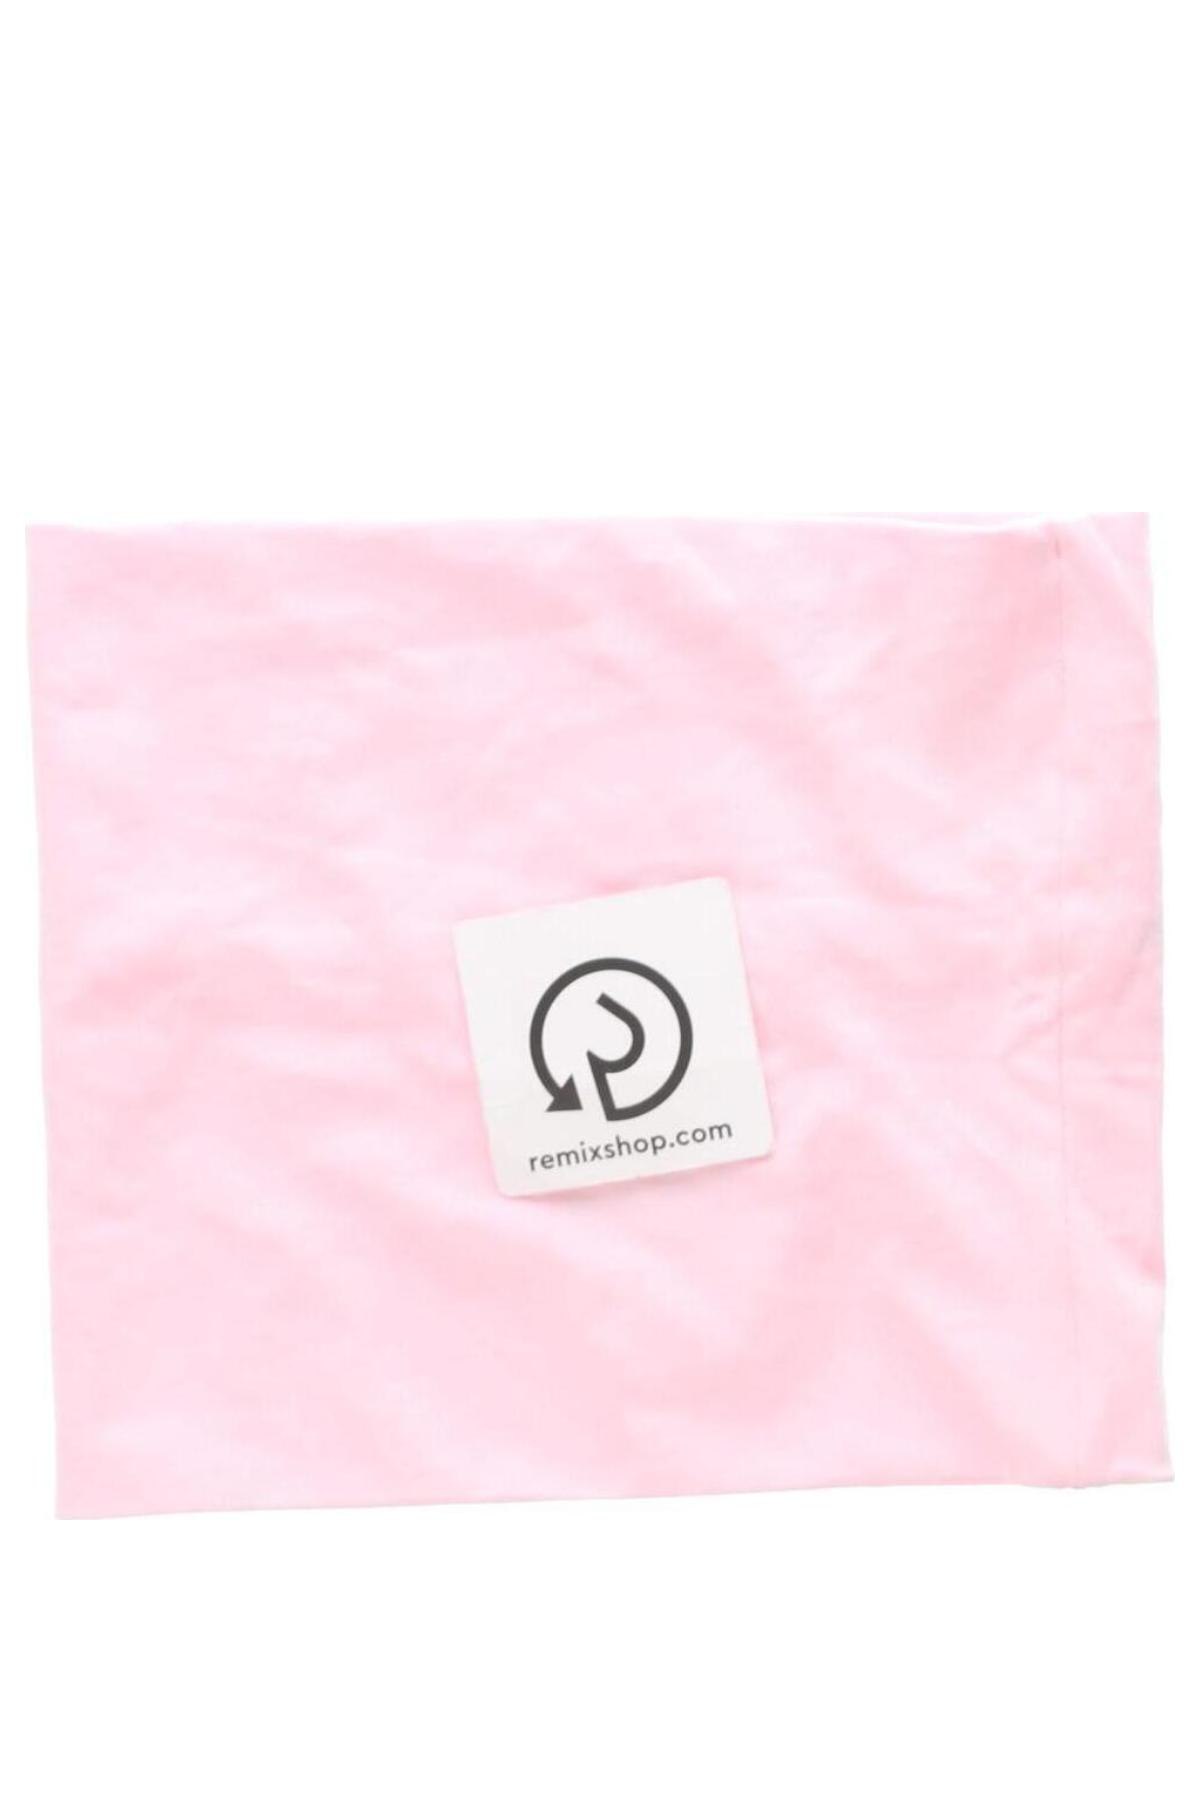 Kinderschal Urban Outfitters, Farbe Rosa, Preis € 2,66